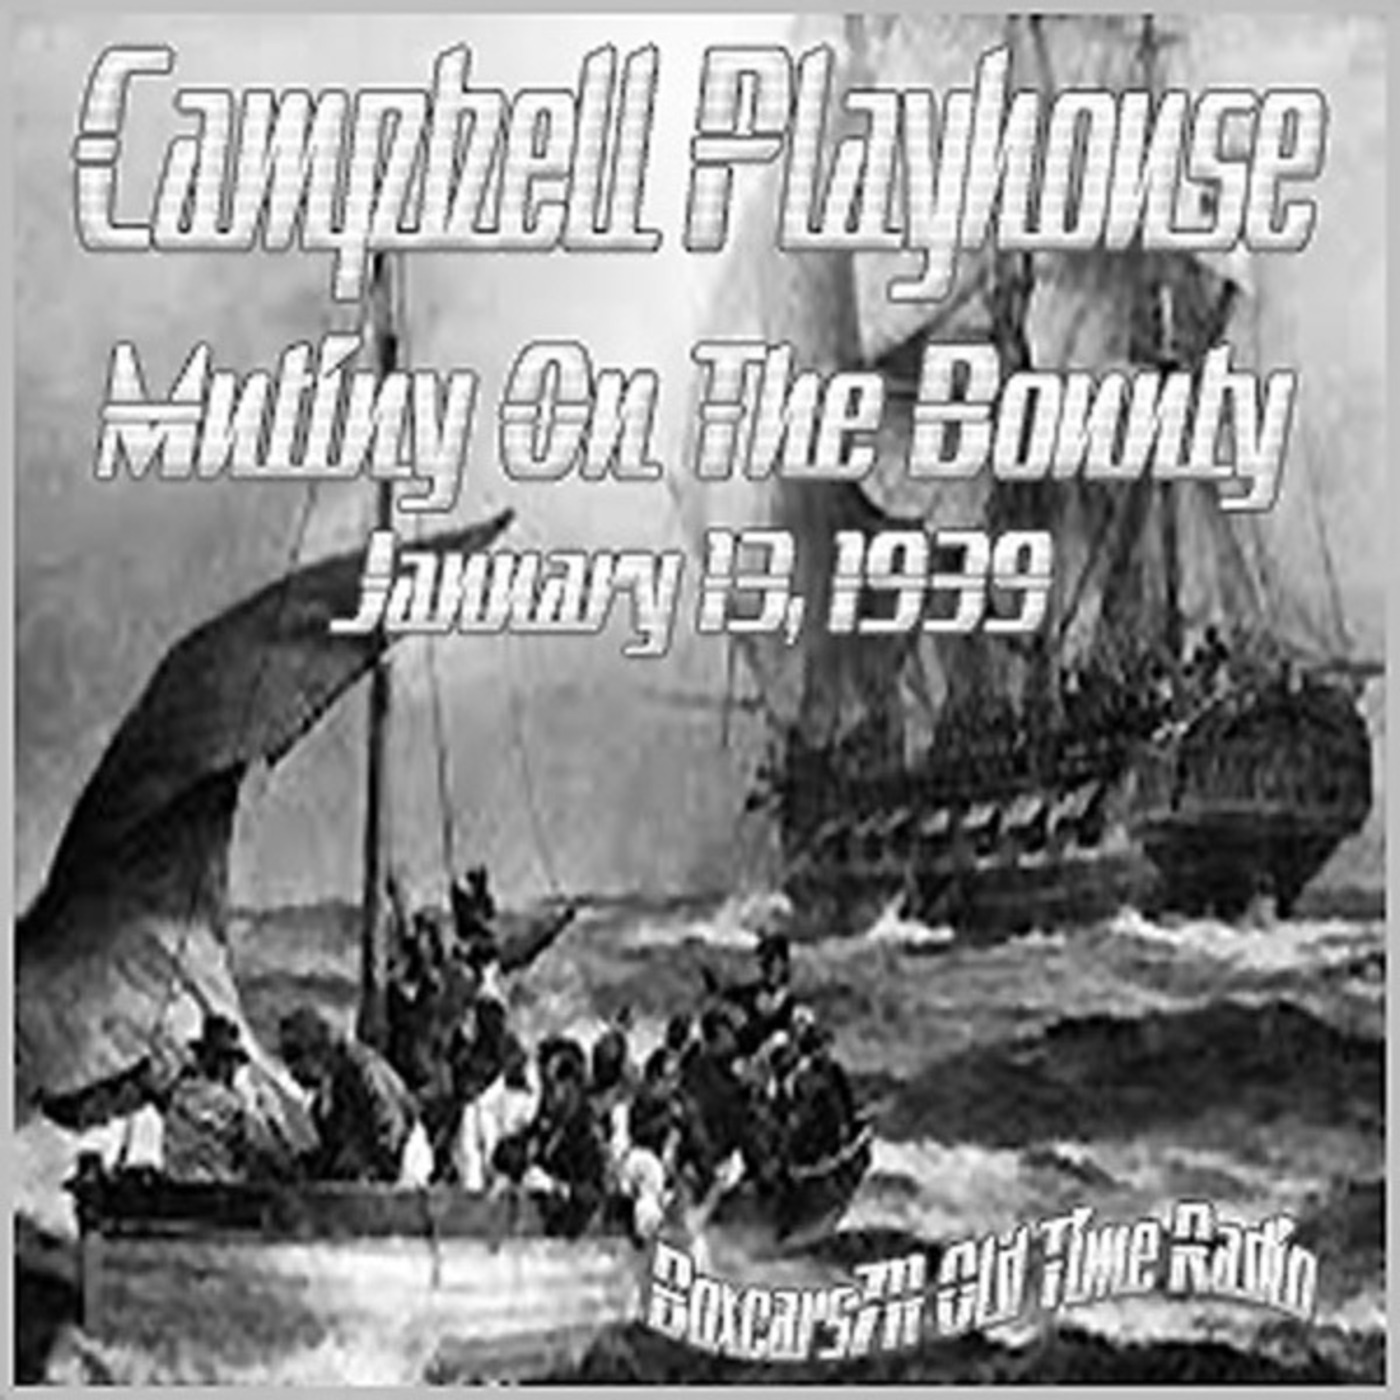 Episode 9605: The Campbell Playhouse - 